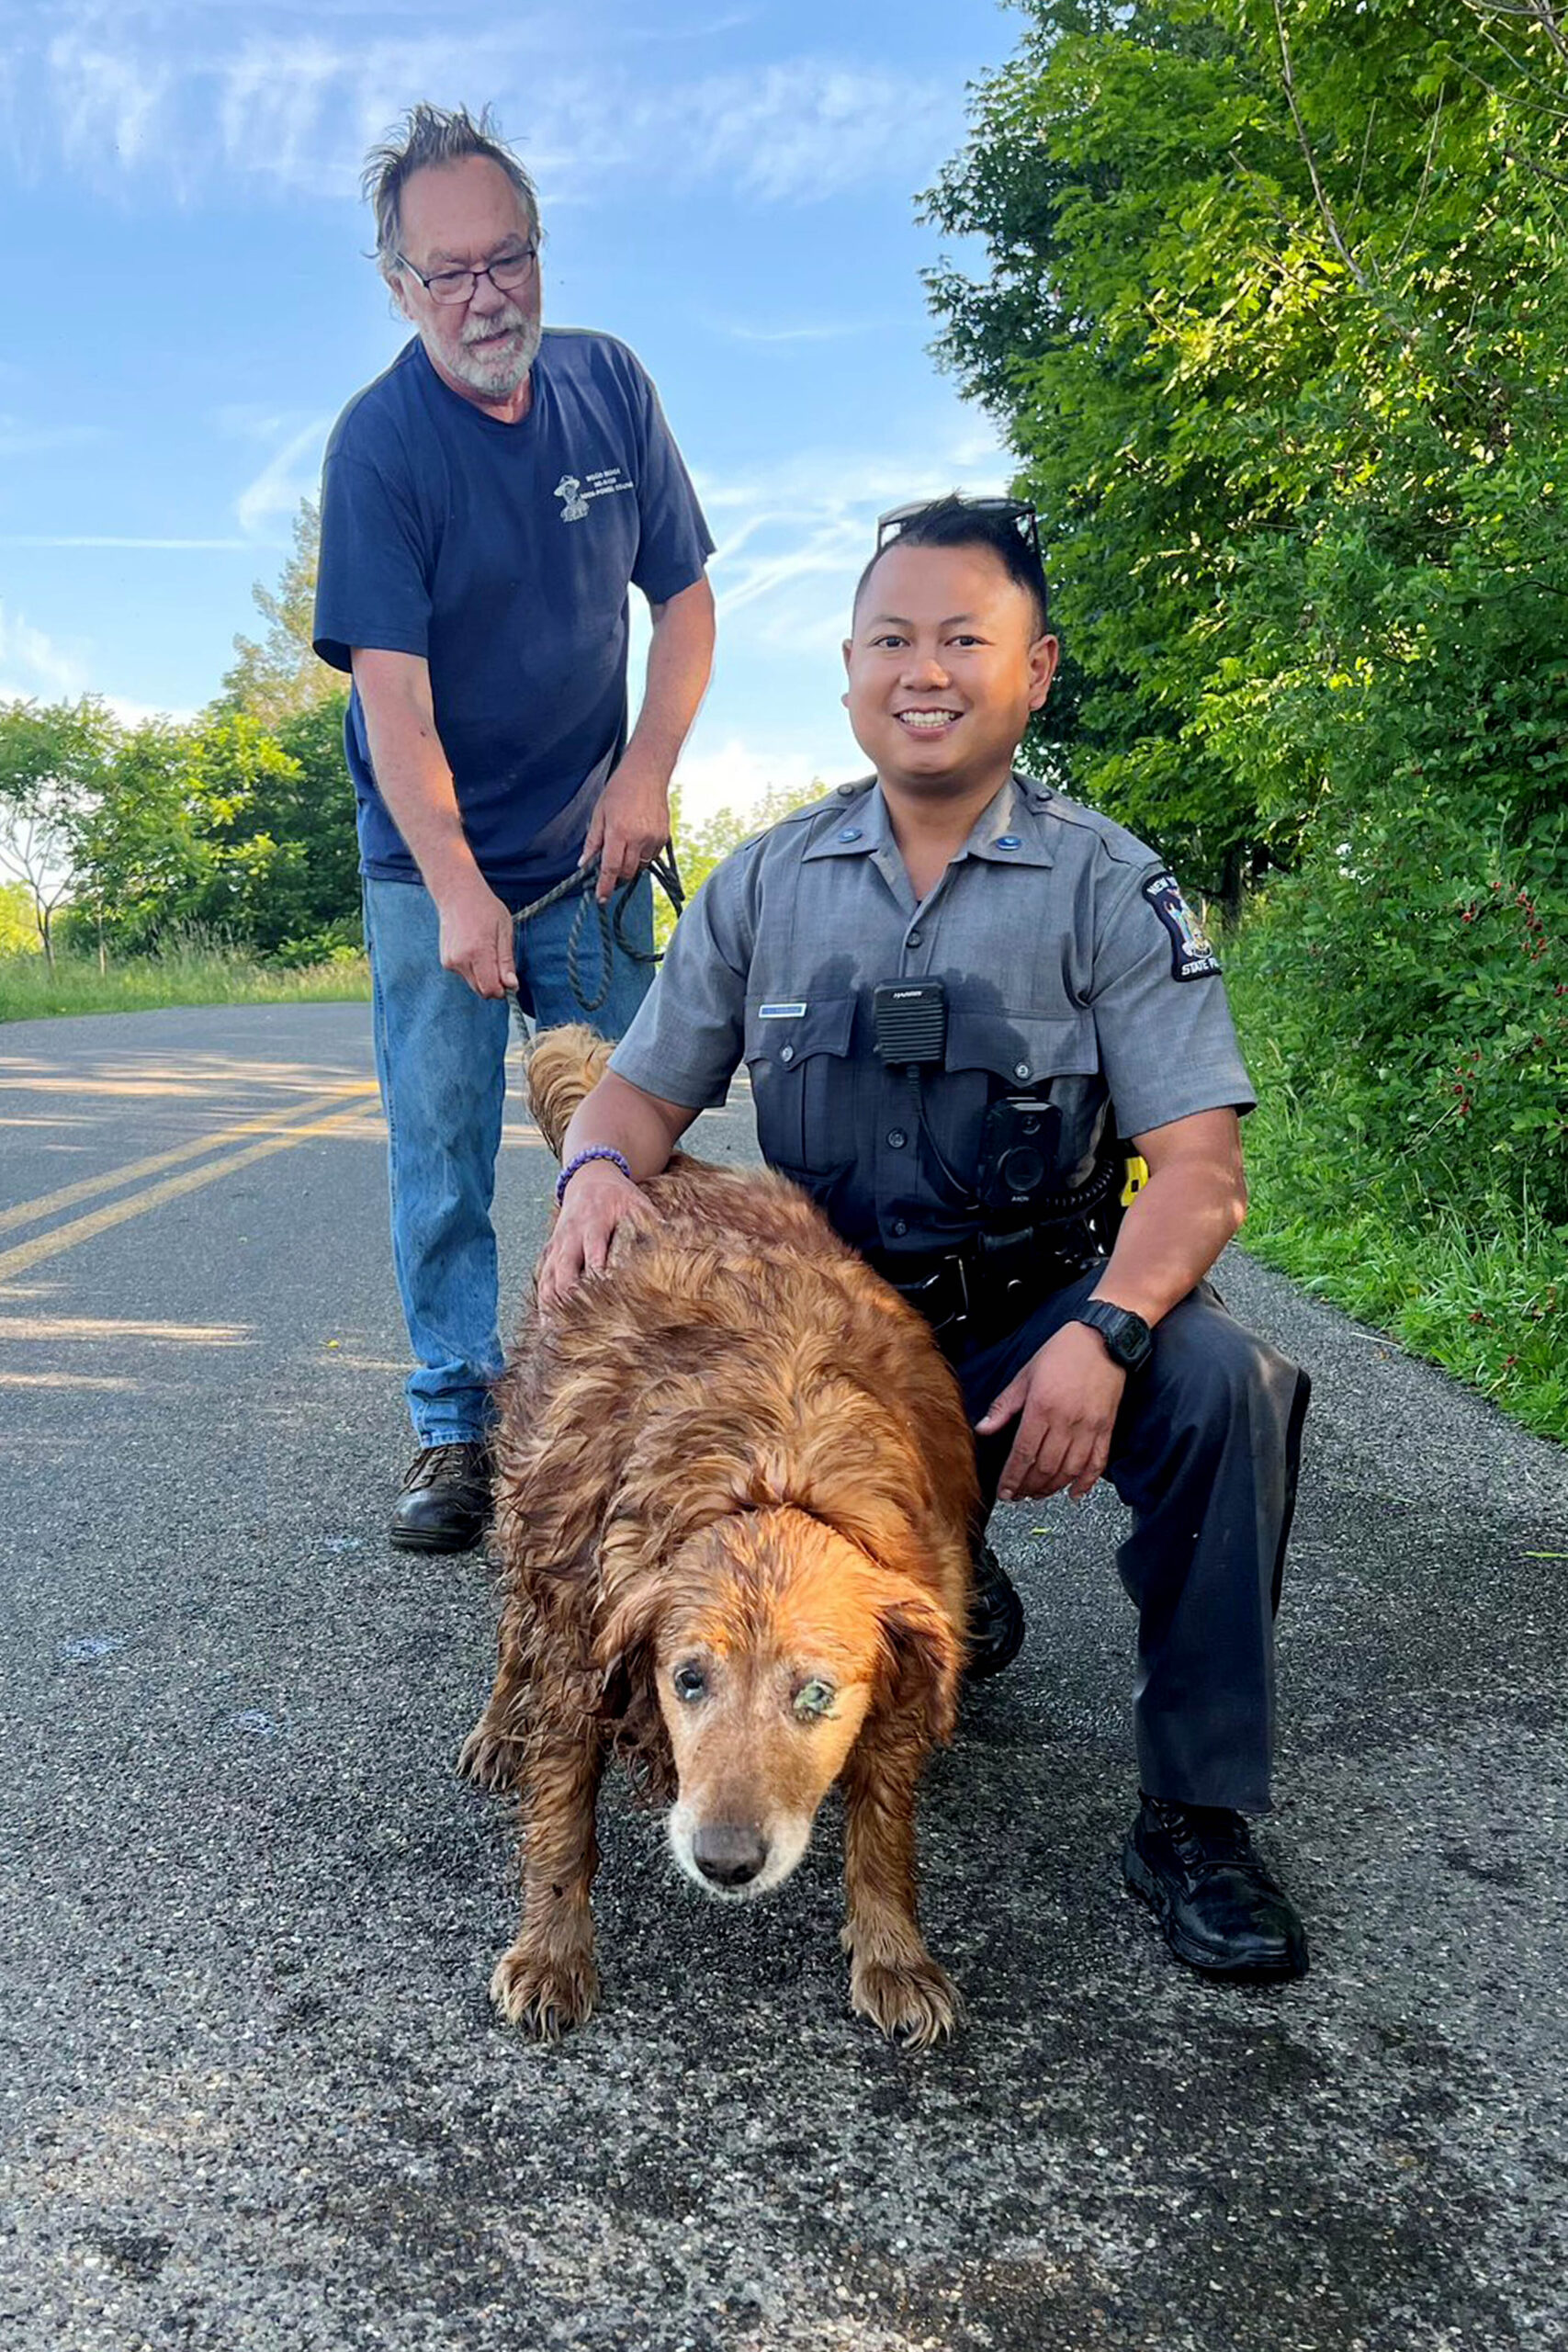 In this image provided by the New York State Police, Trooper Jimmy Rasaphone, right, poses for a photo with 13-year-old golden retriever Lilah, and her owner Rudy Fuehrer, after the trooper rescued her from a culvert pipe in Conklin, NY., on Sunday, June 26, 2022. Rasaphone grabbed a rope and crawled about 15 feet into the pipe, got to the dog and put her collar on her, and pulled the dog to safety with Fuehrer's help. (New York State Police via AP)